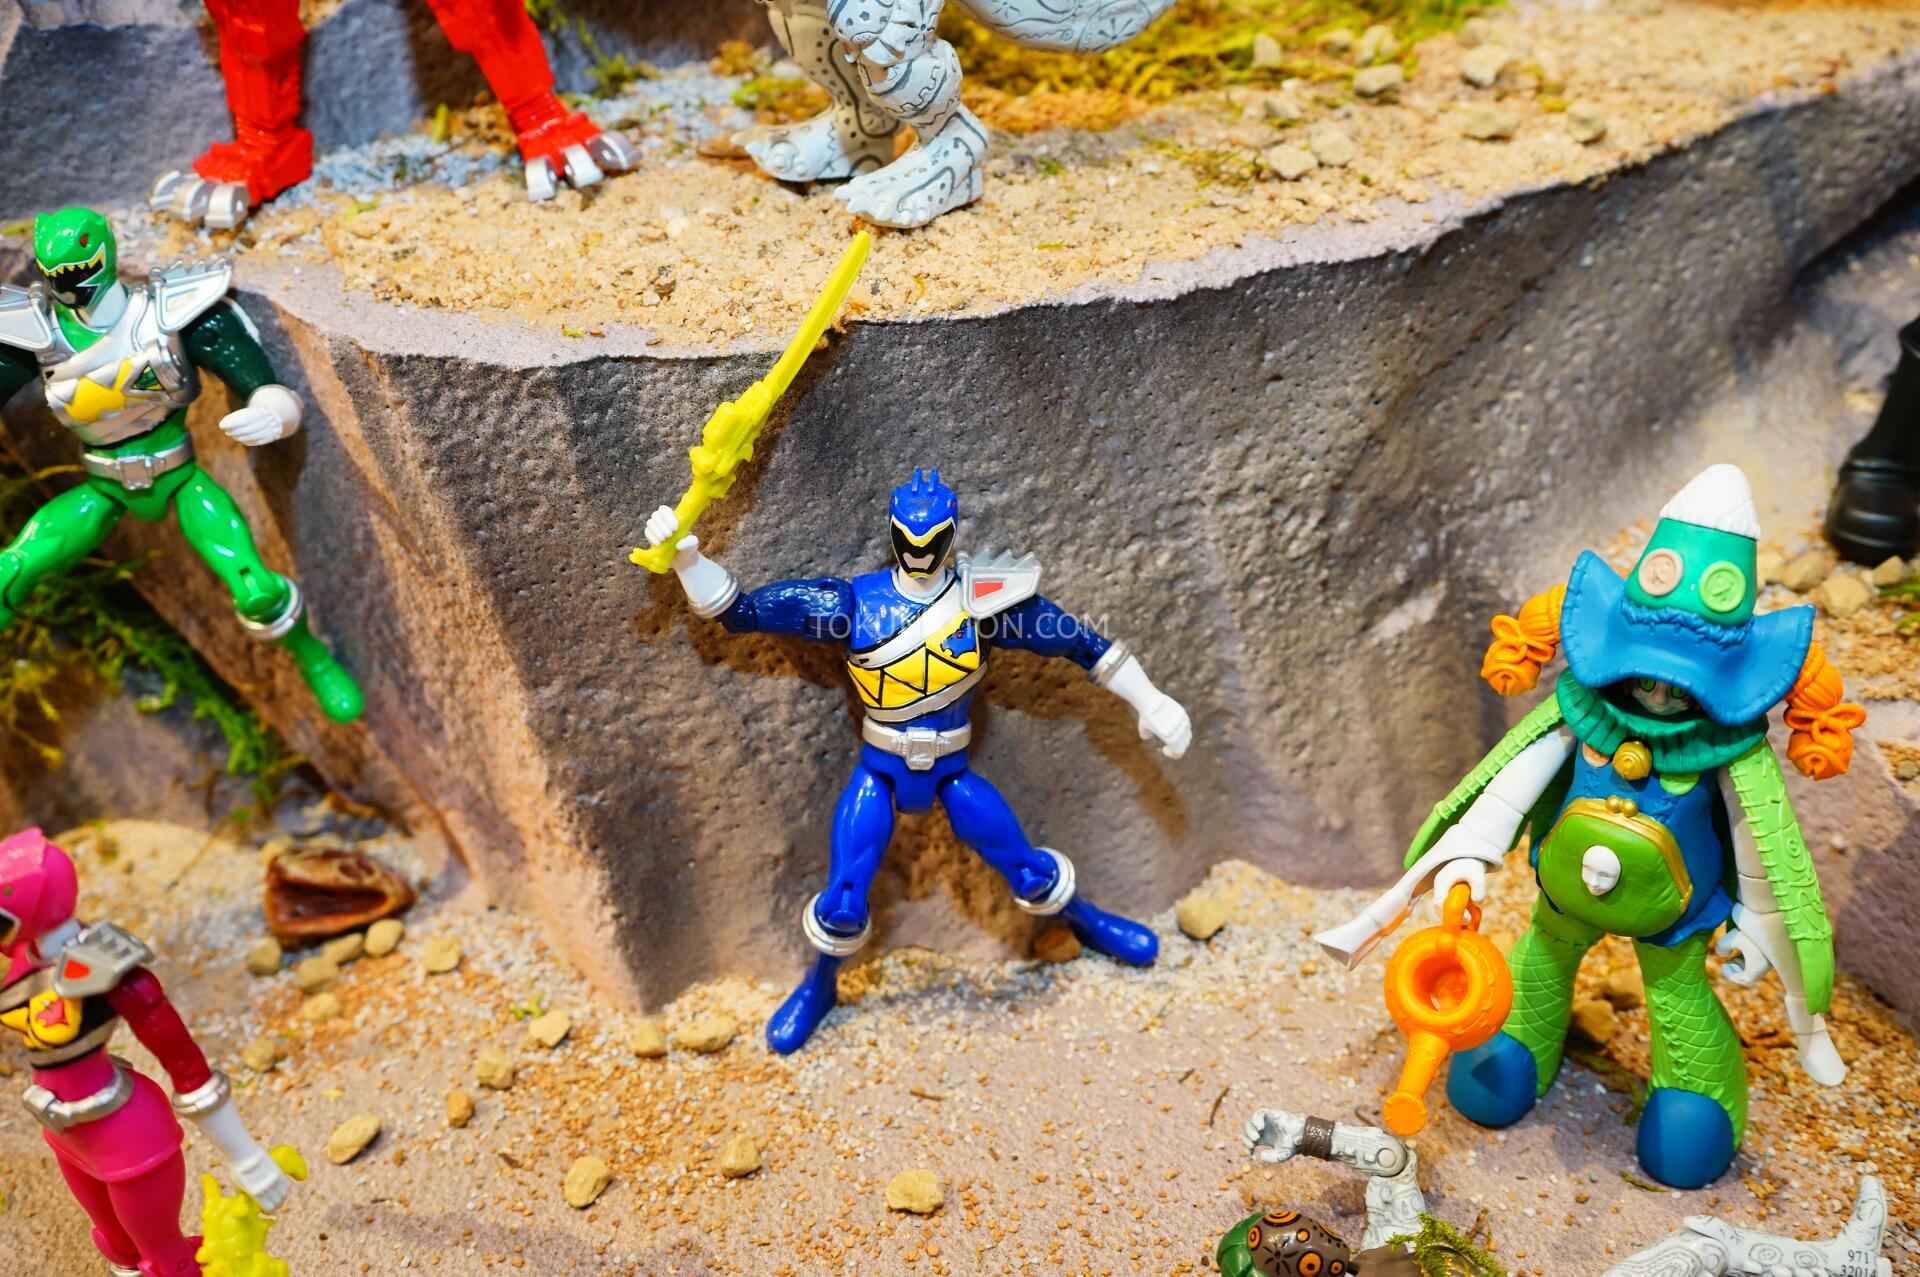 Toy Fair 2015 - Power Rangers Dino Charge 5" Figures - Tons of Villains ...
